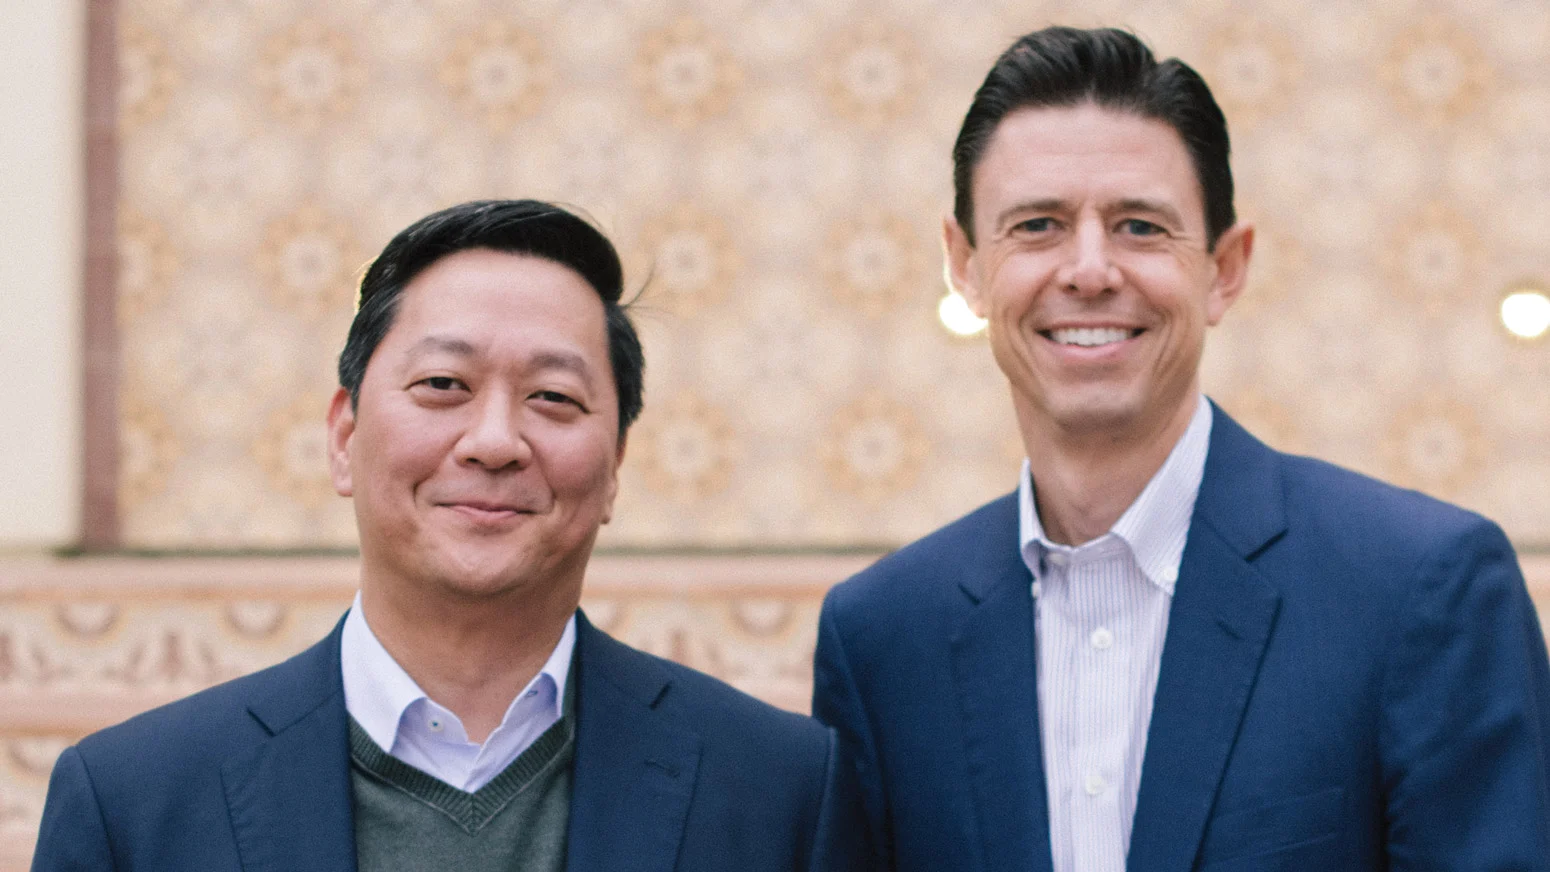 KKR Closes $3 Billion Tech Growth Fund, Including $400 Million From Employees